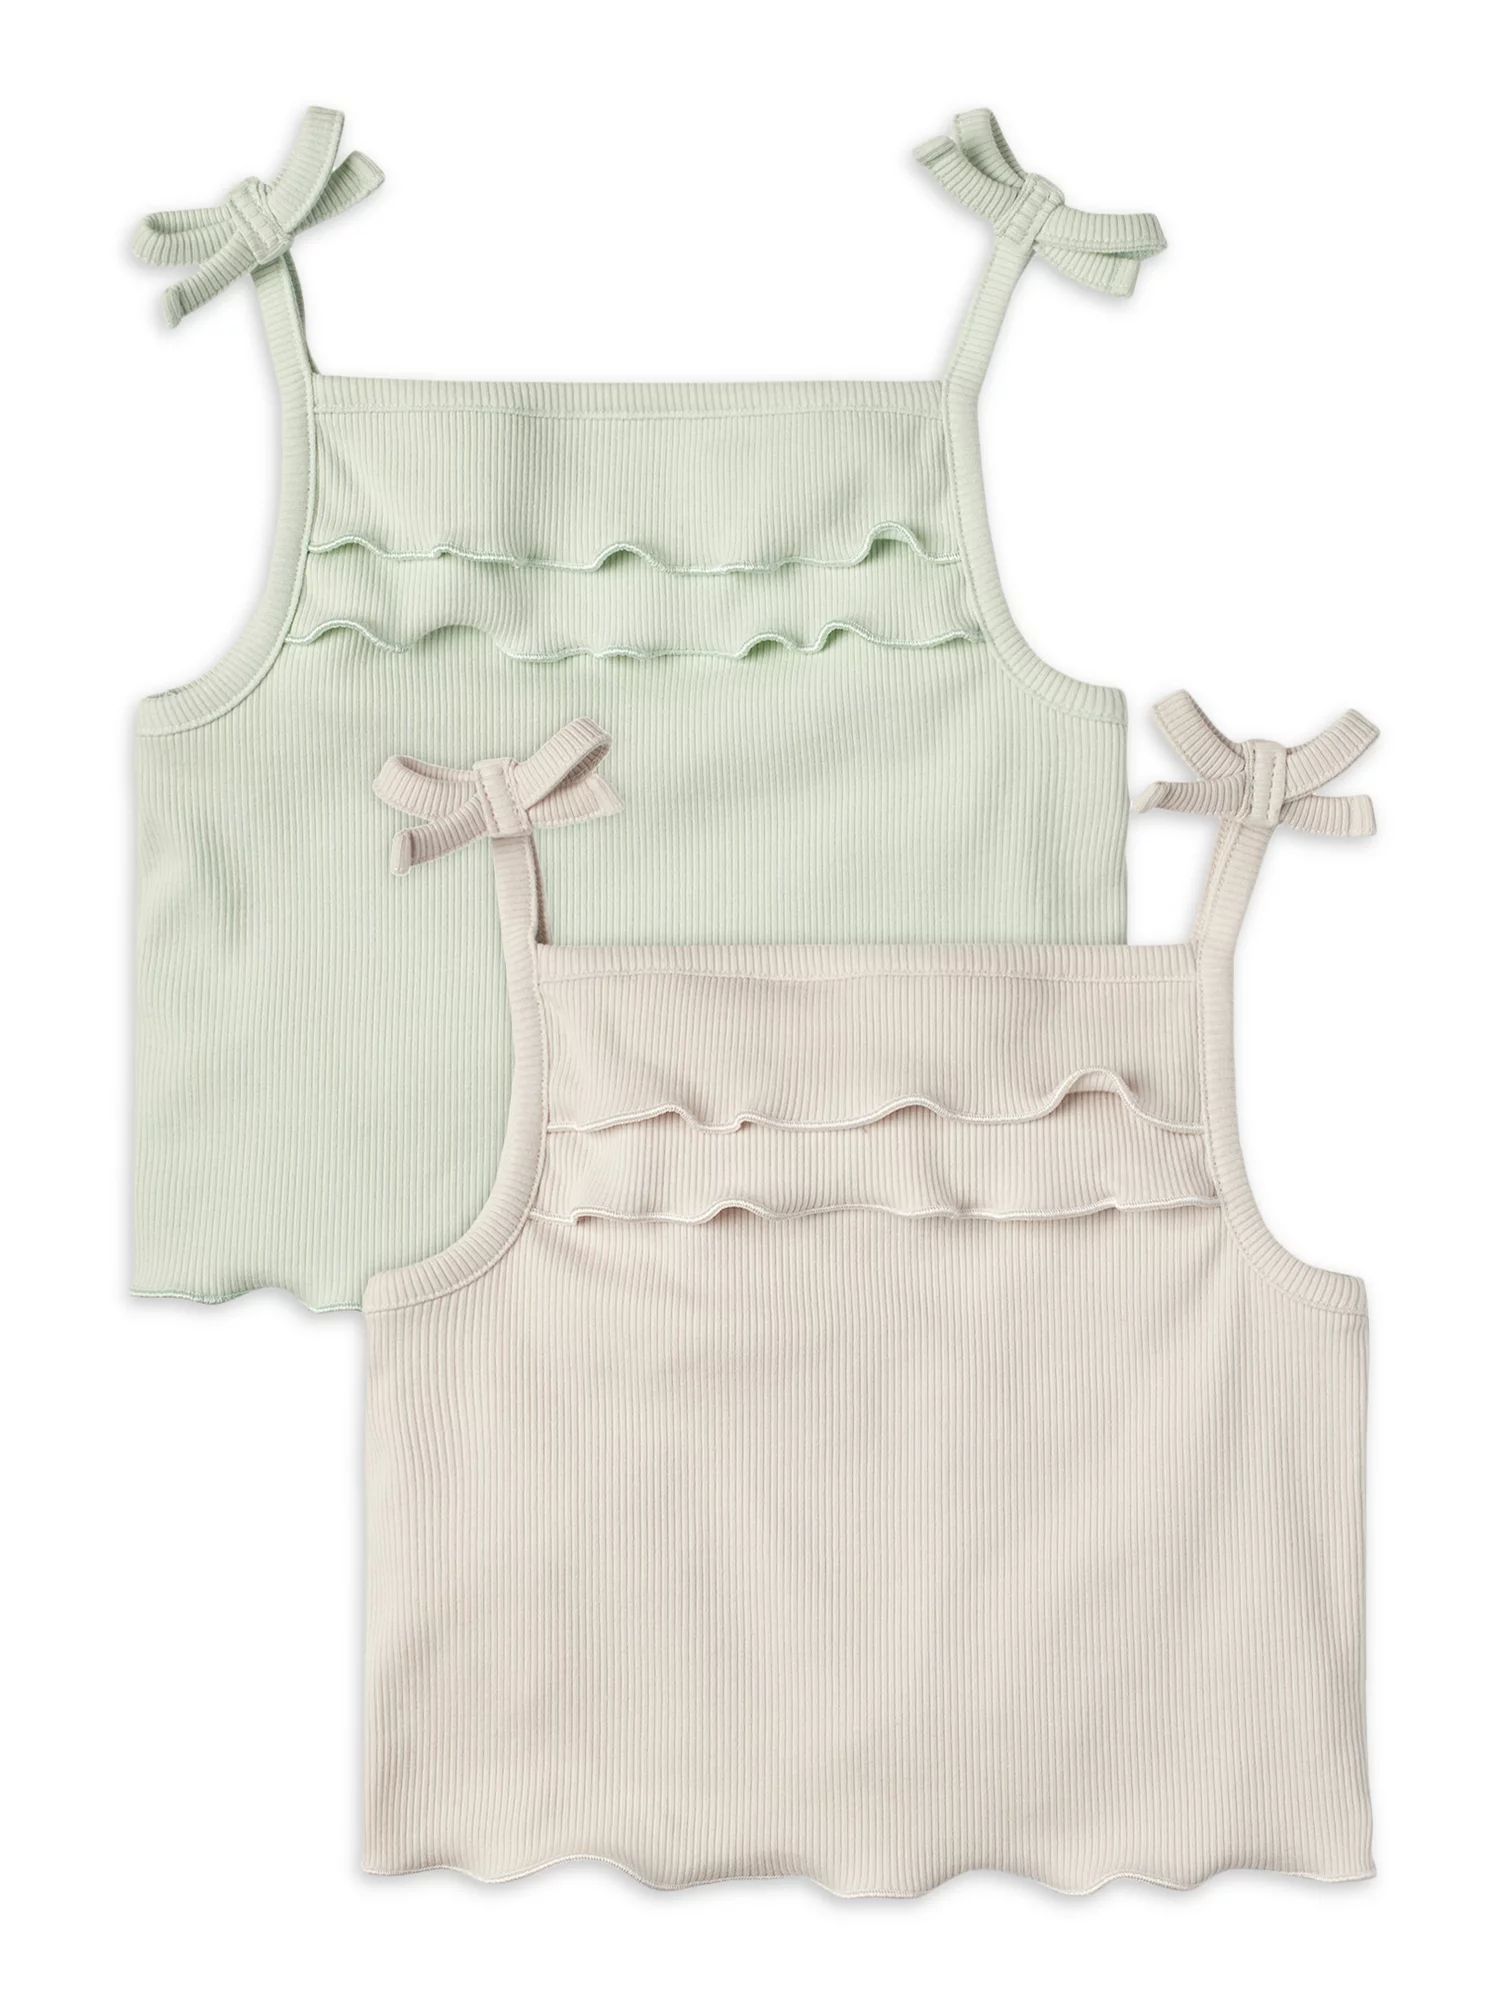 Modern Moments by Gerber Toddler Girl Ruffled Tank Top, 2-Pack, Sizes 12M-5T | Walmart (US)